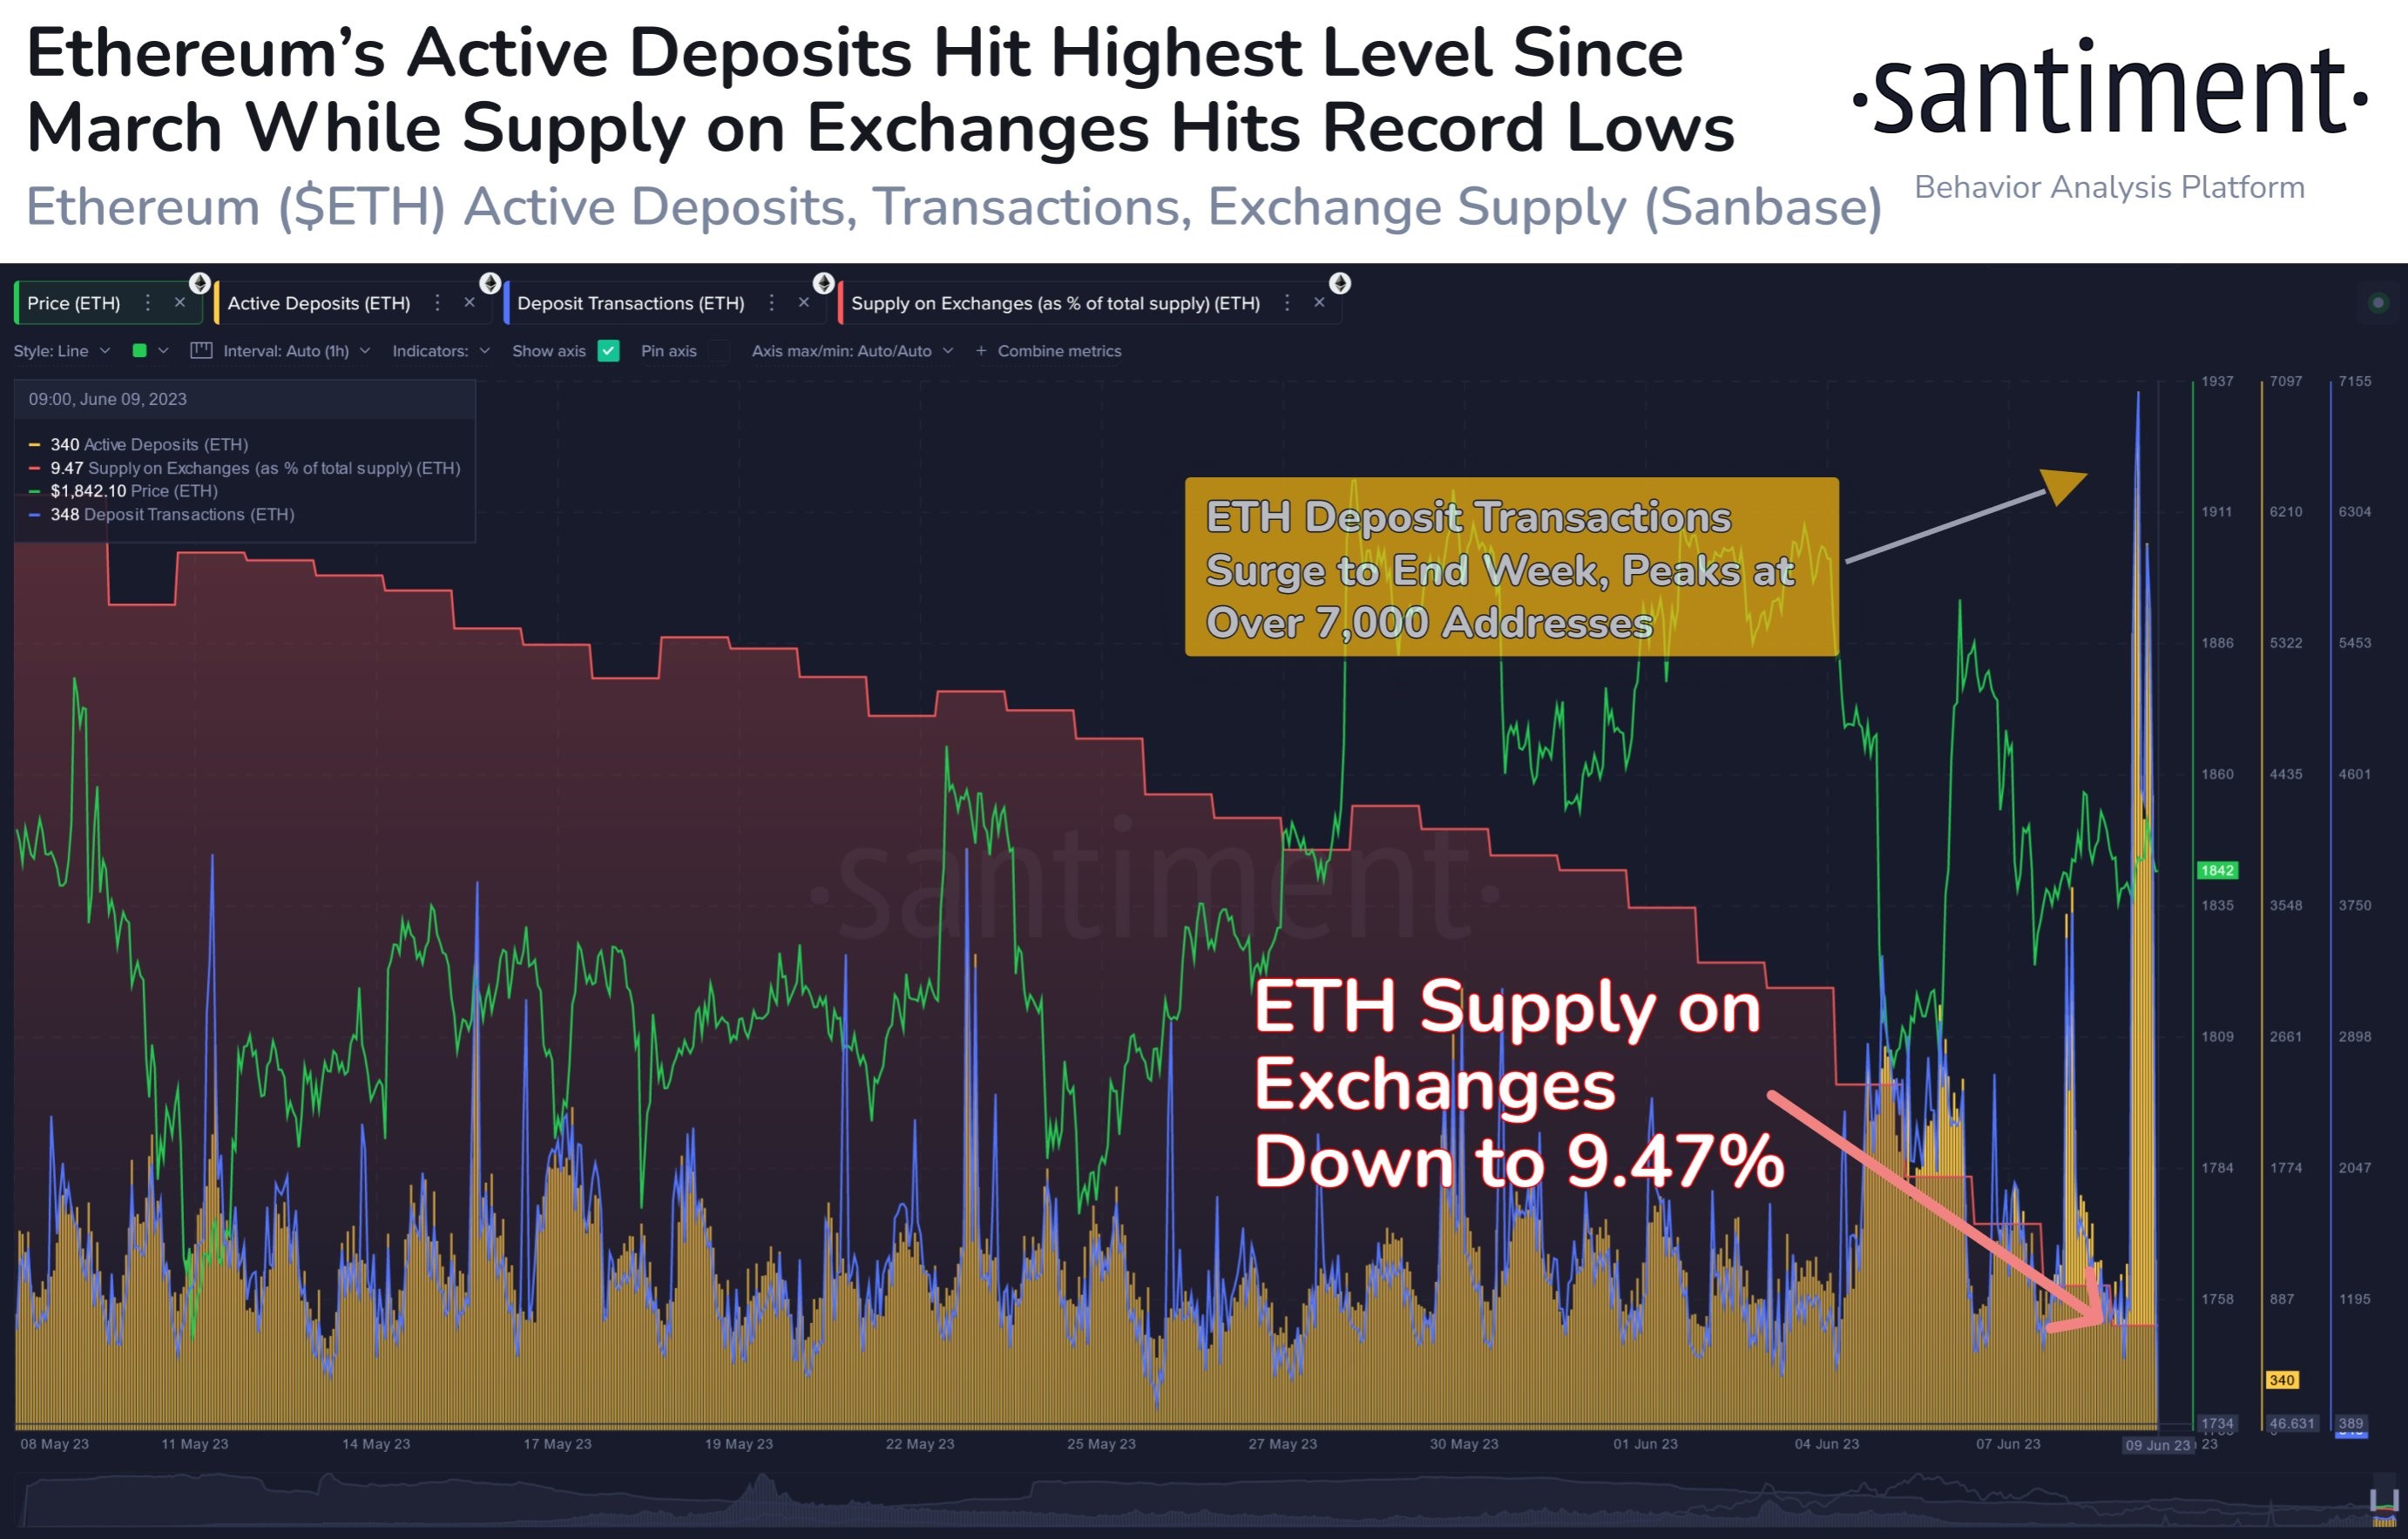 Market research report: Altcoins crushed on SEC’s new crypto witch hunt, stocks flat ahead of FED meeting - ETH Exch Depo